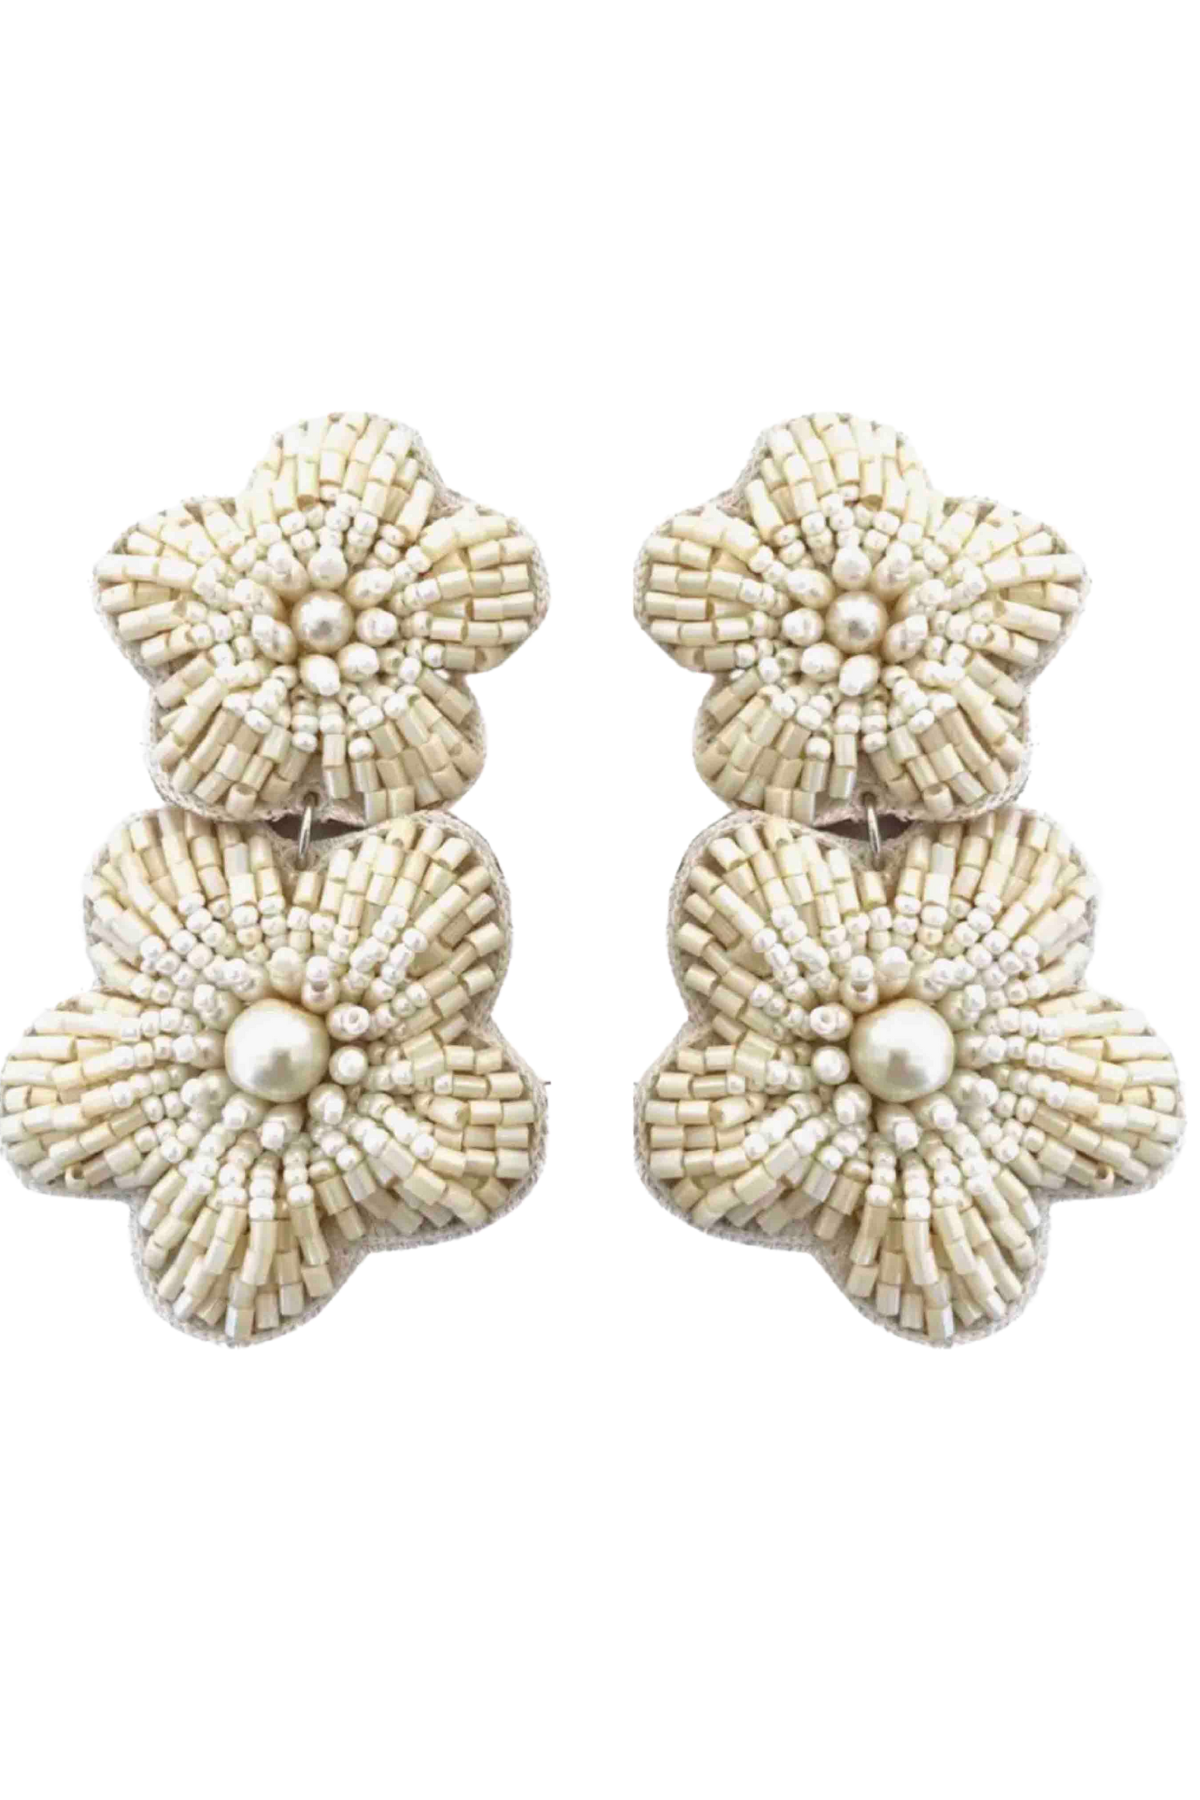 Ivory Bali Double Flower Dangle Earrings by Beth Ladd Collections